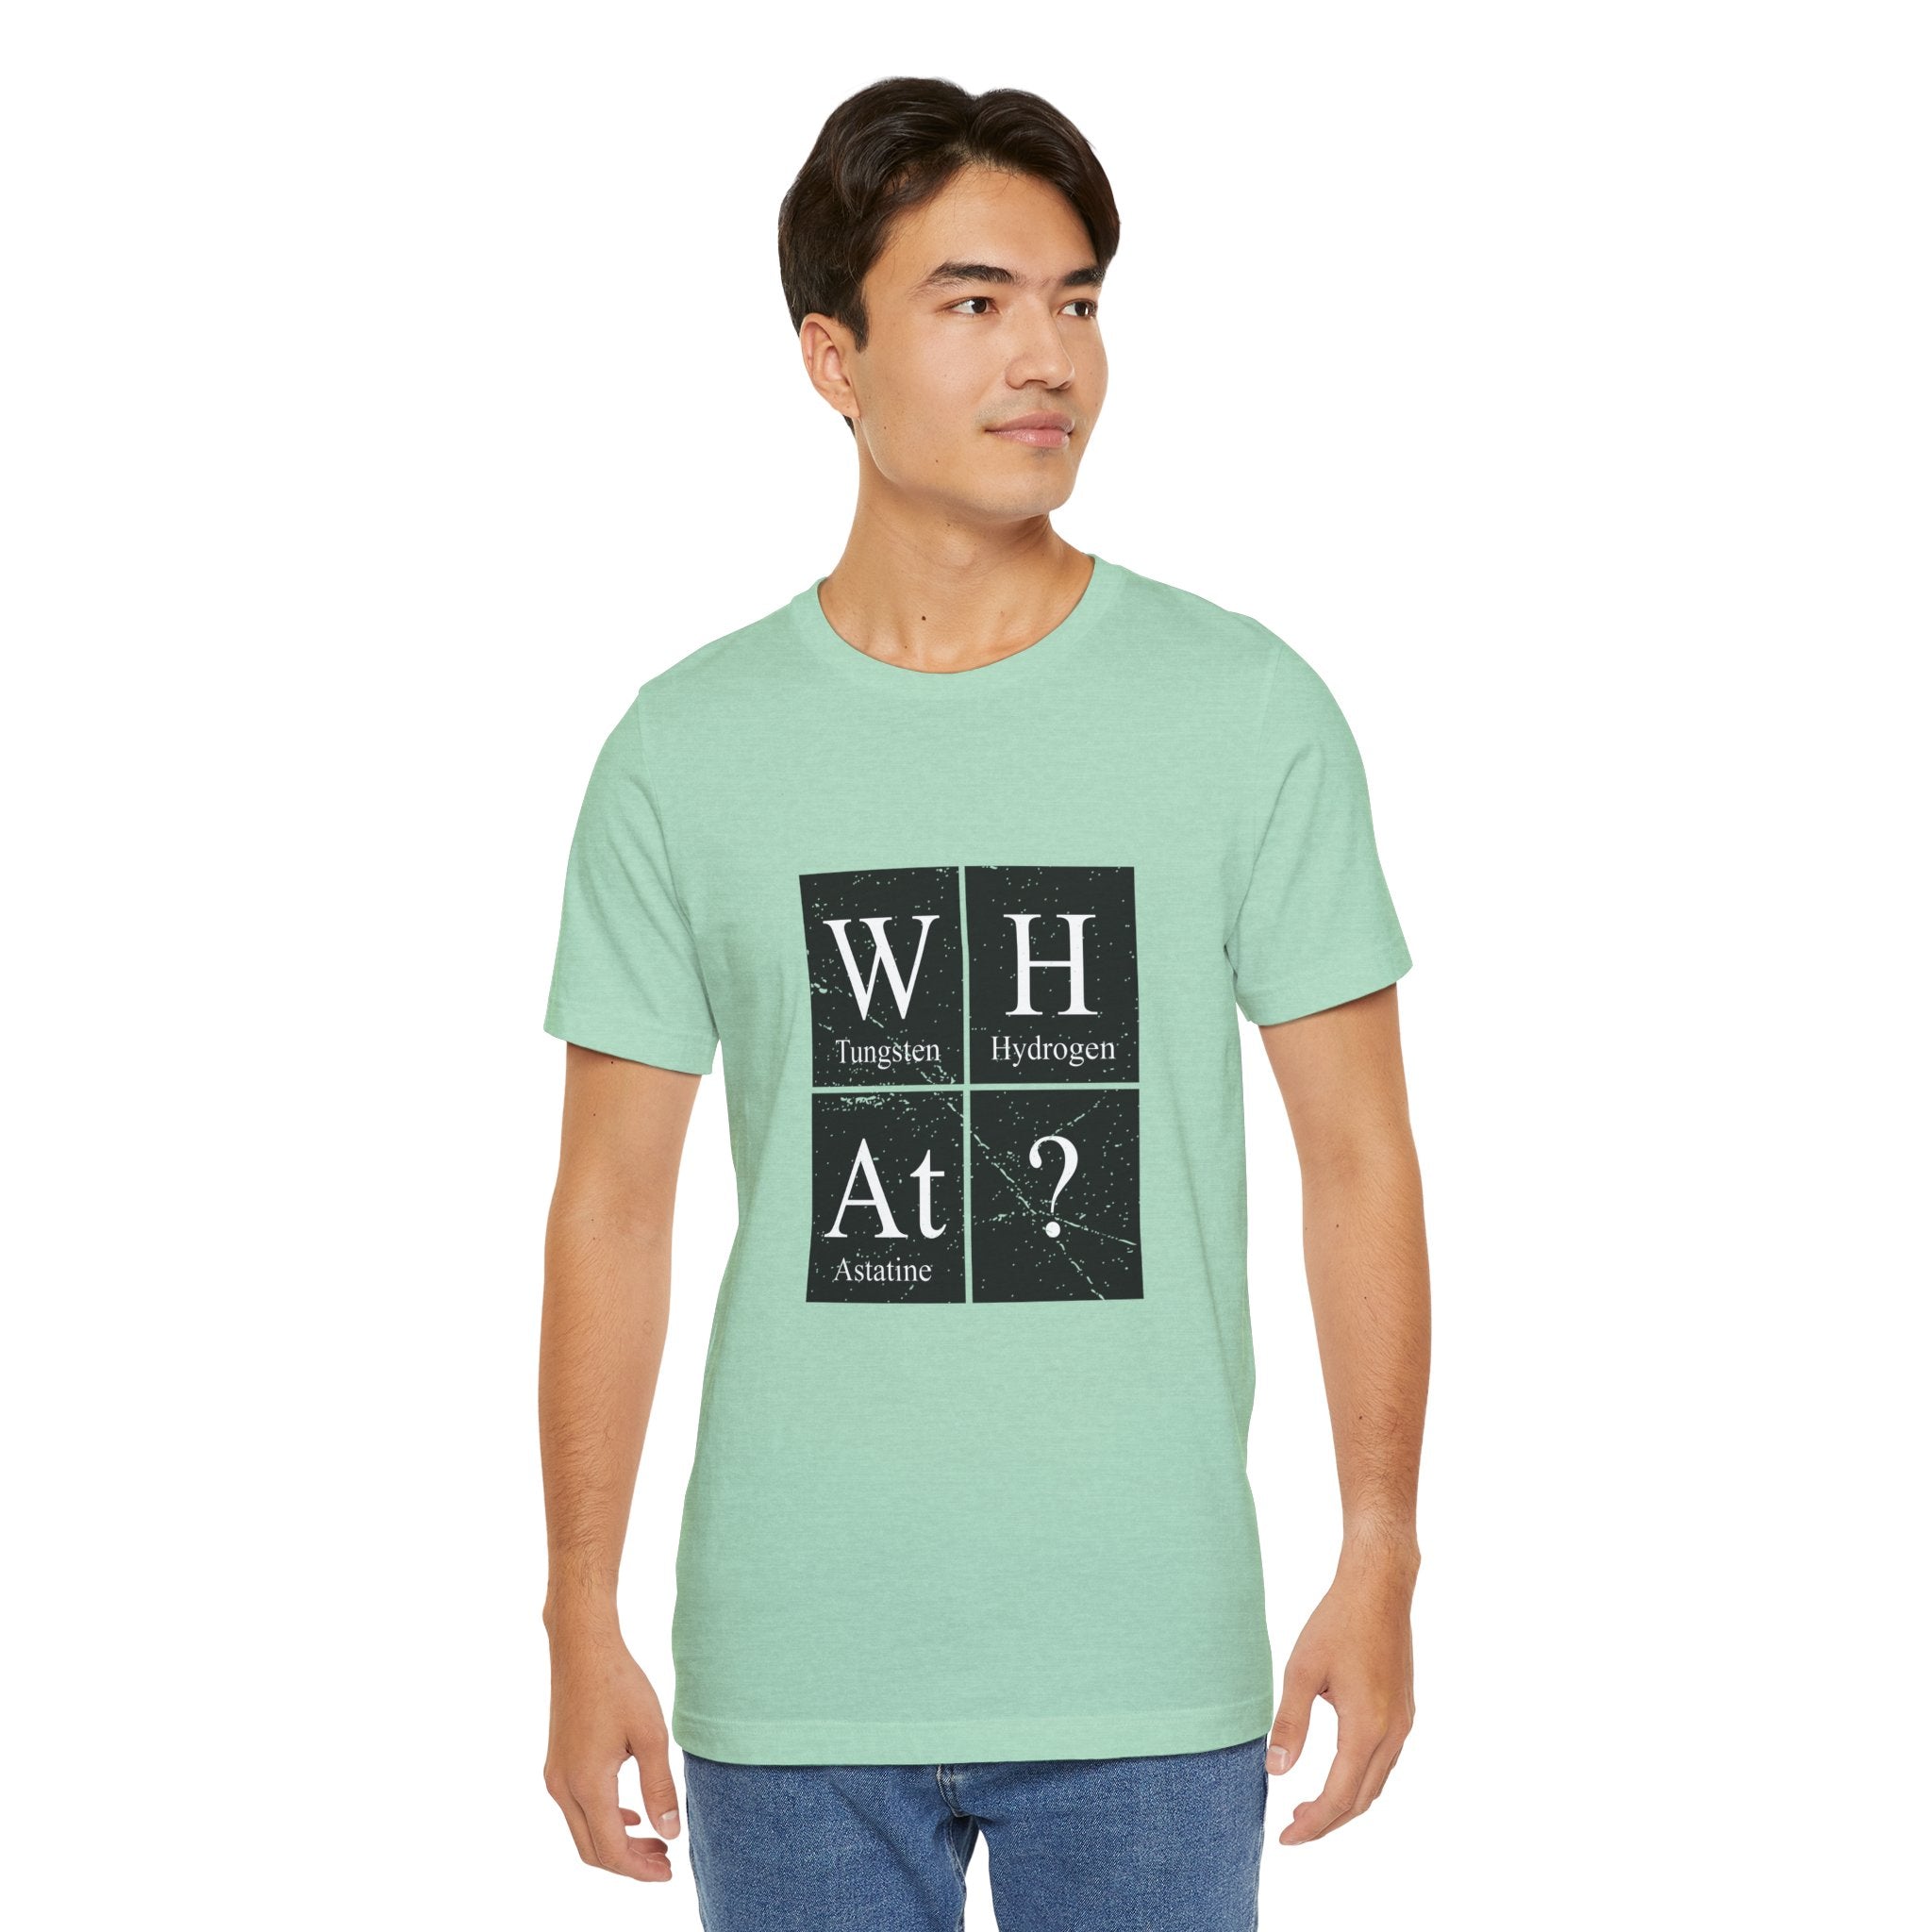 Young man wearing a light green unisex jersey tee with the W-H-At-? design featuring the elements tungsten (W), hydrogen (H), and astatine (At) with a question mark.